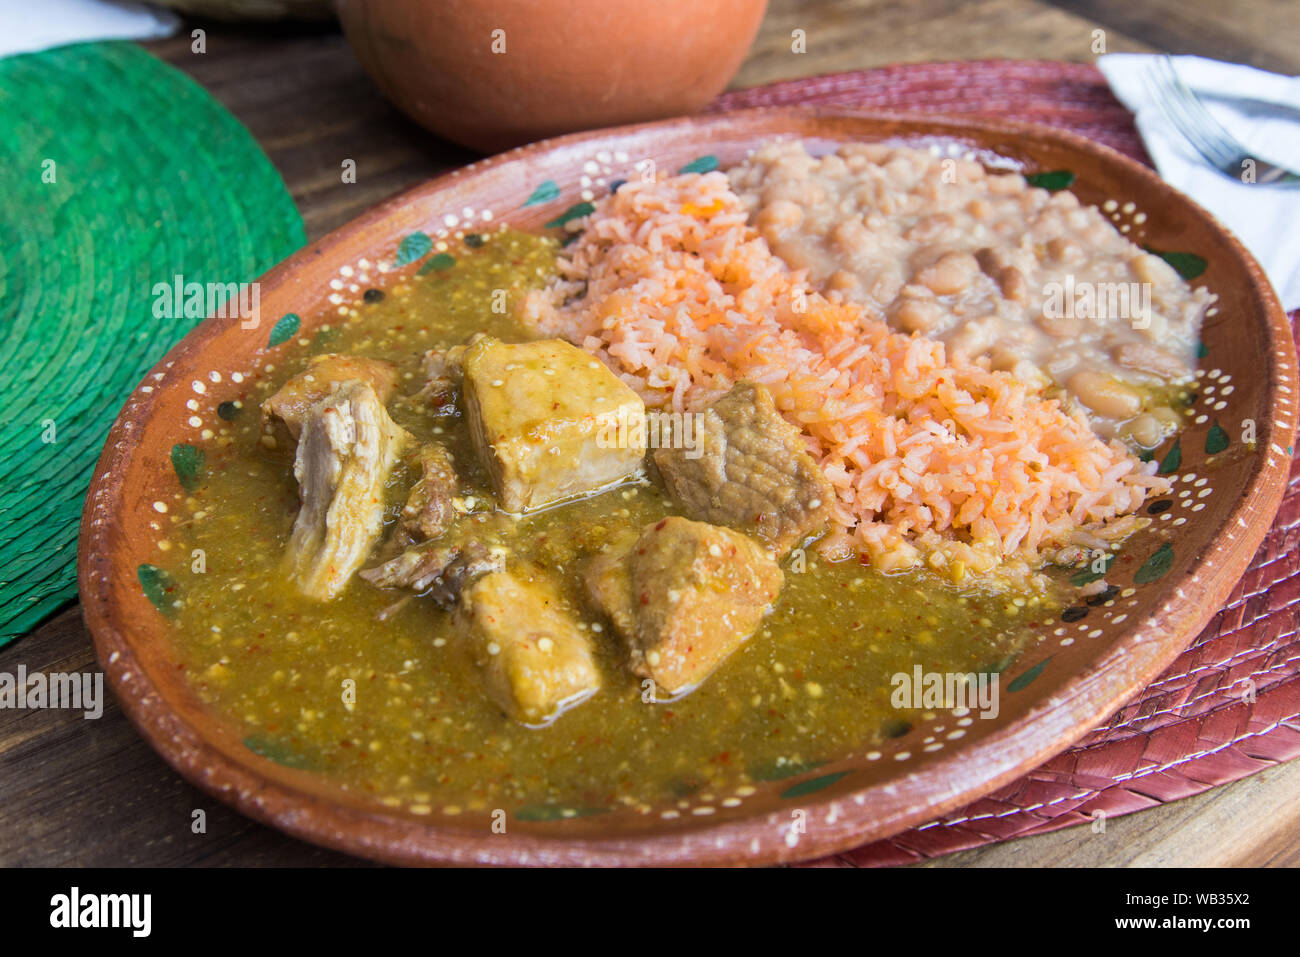 Traditional Mexican food dish Stock Photo